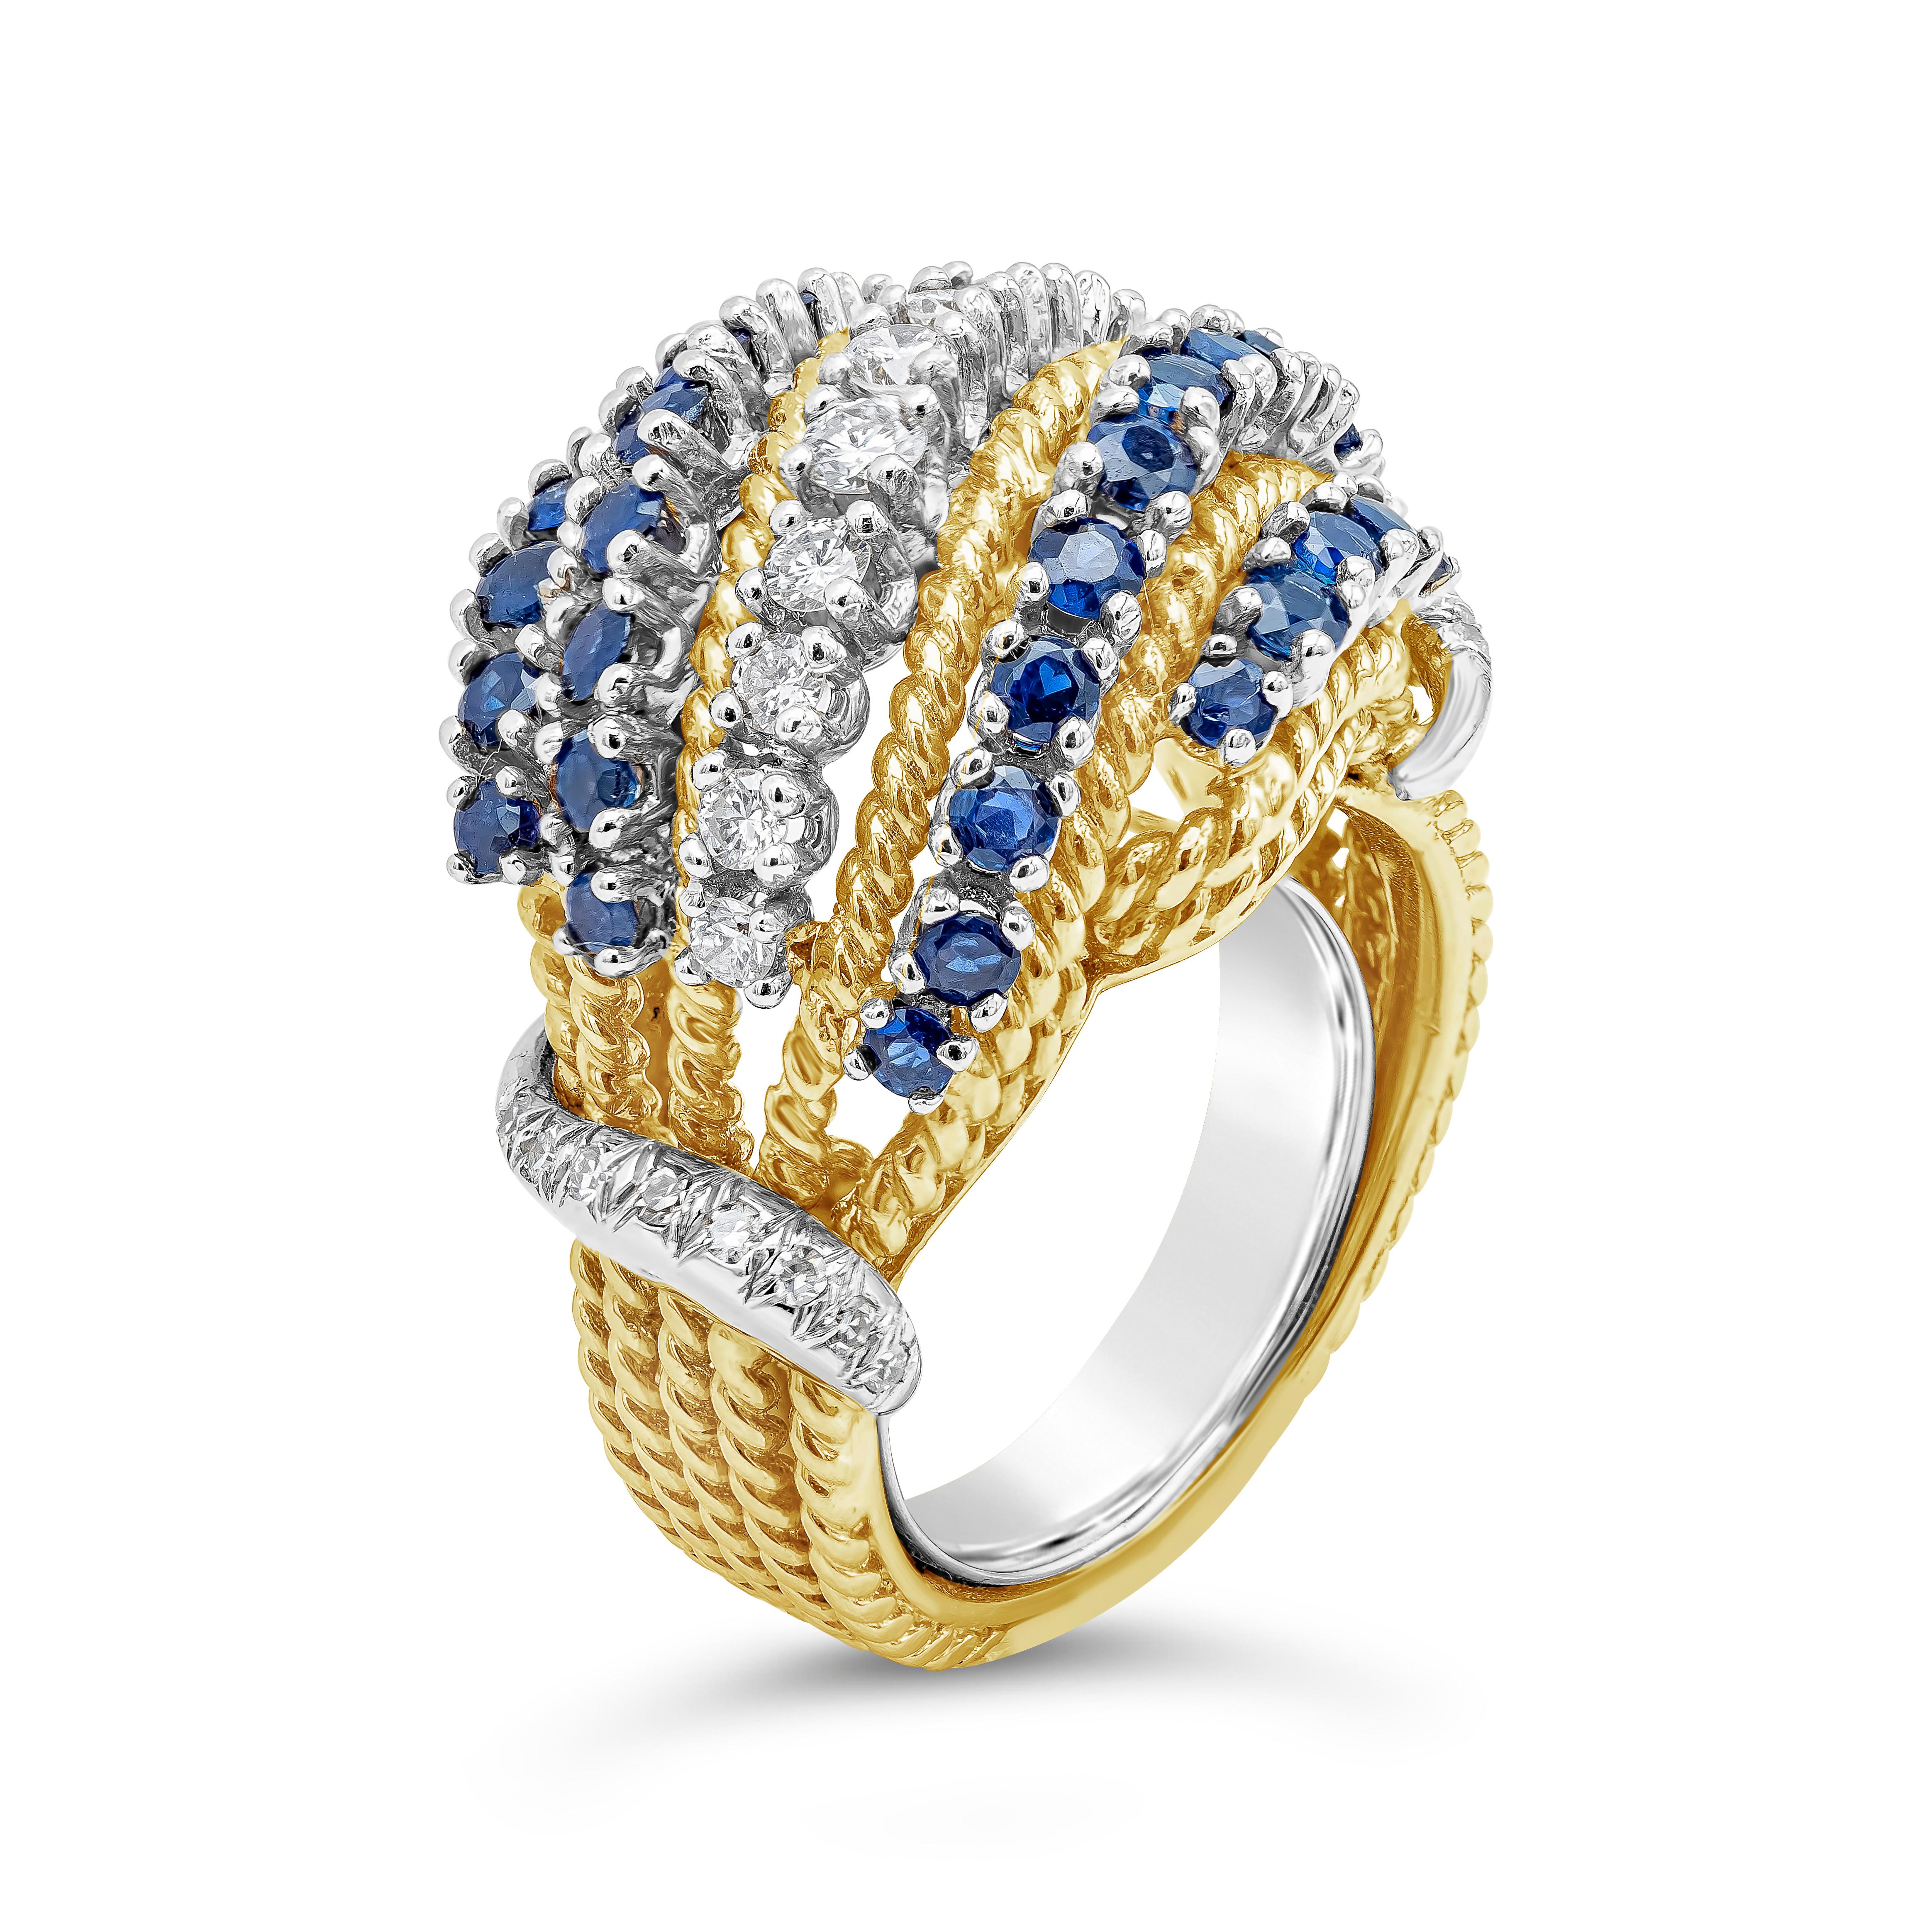 A fashionable cocktail ring featuring a row of round cut diamond in the middle, accented on both sides with two rows of blue sapphires. Sapphires weigh approximately 1.30 carats total. Diamonds weigh approximately 0.60 carats total. Finely made in